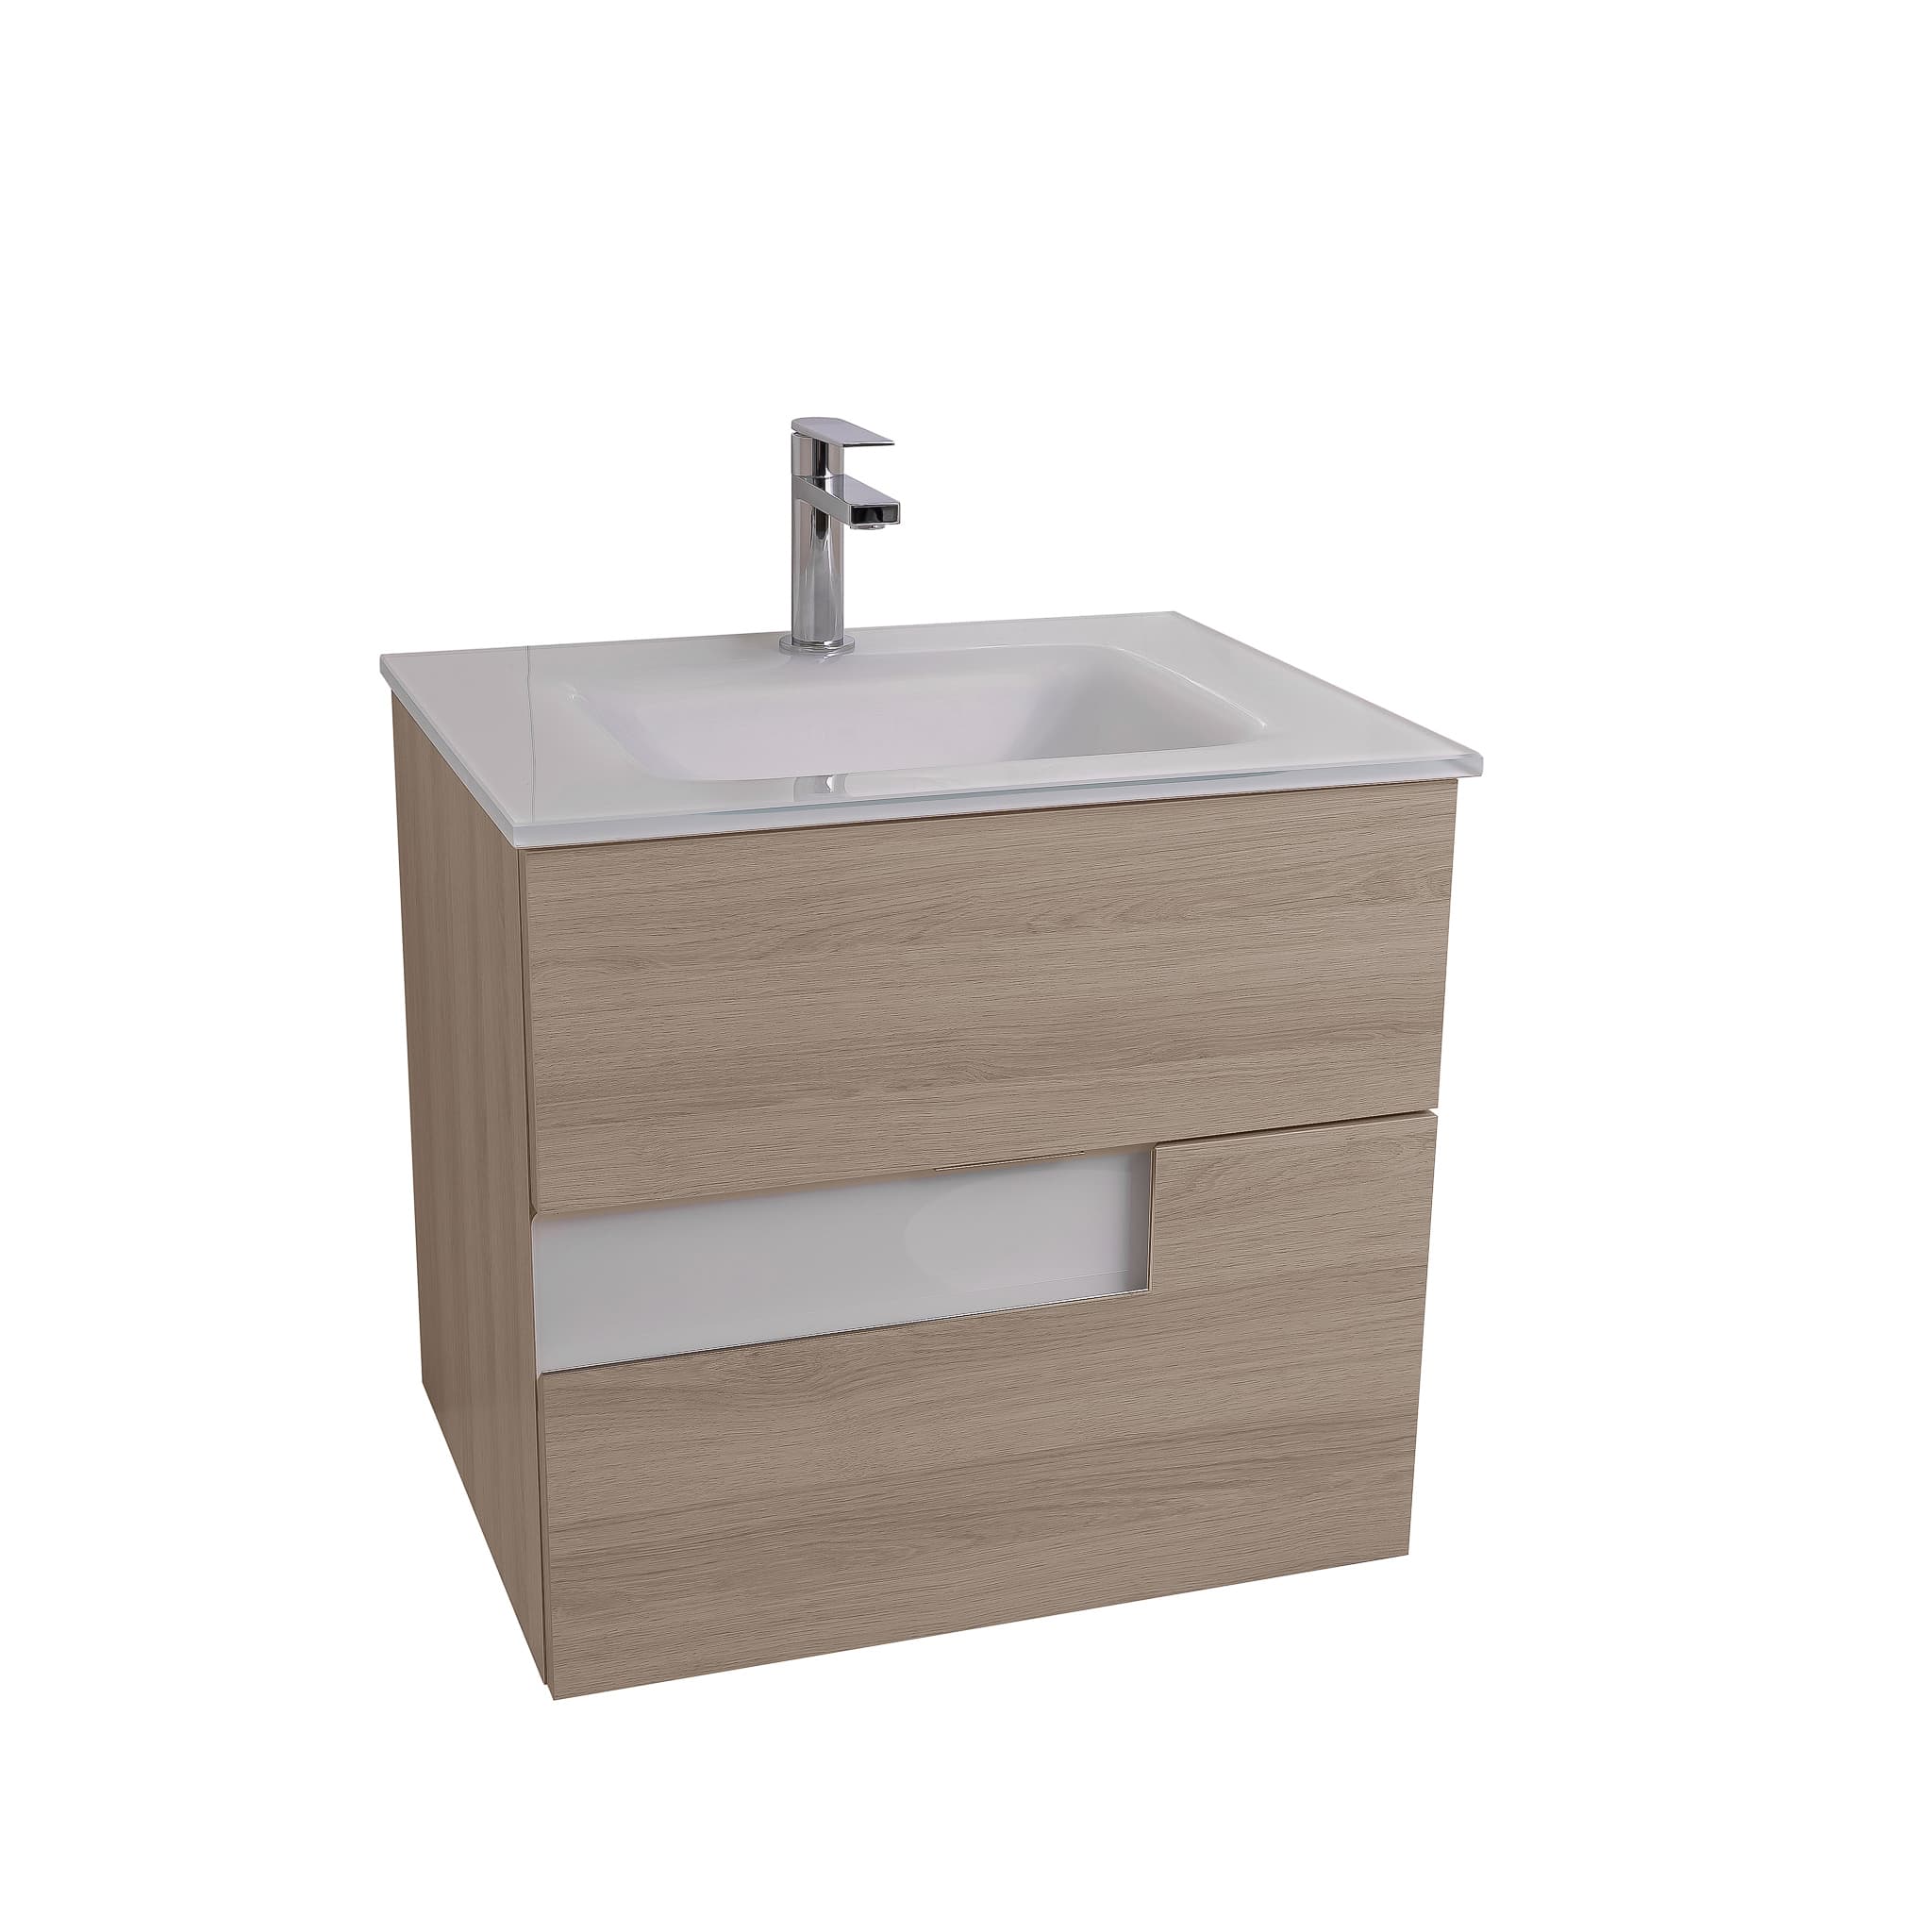 Vision 23.5 Natural Light  Wood Cabinet, White Tempered Glass Sink, Wall Mounted Modern Vanity Set